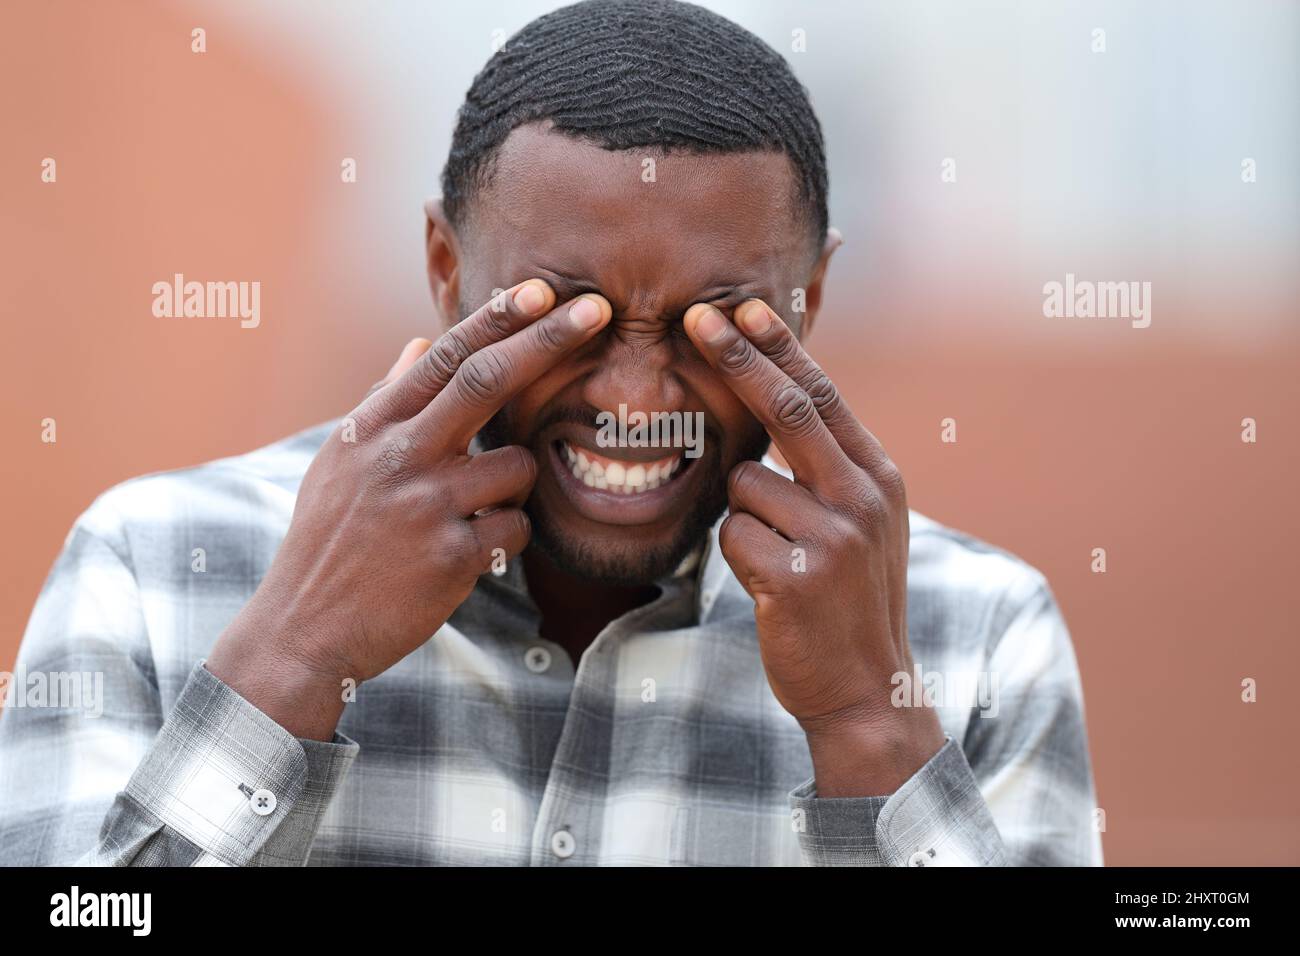 Front view portrait of a man with black skin scratching eyes in the street Stock Photo